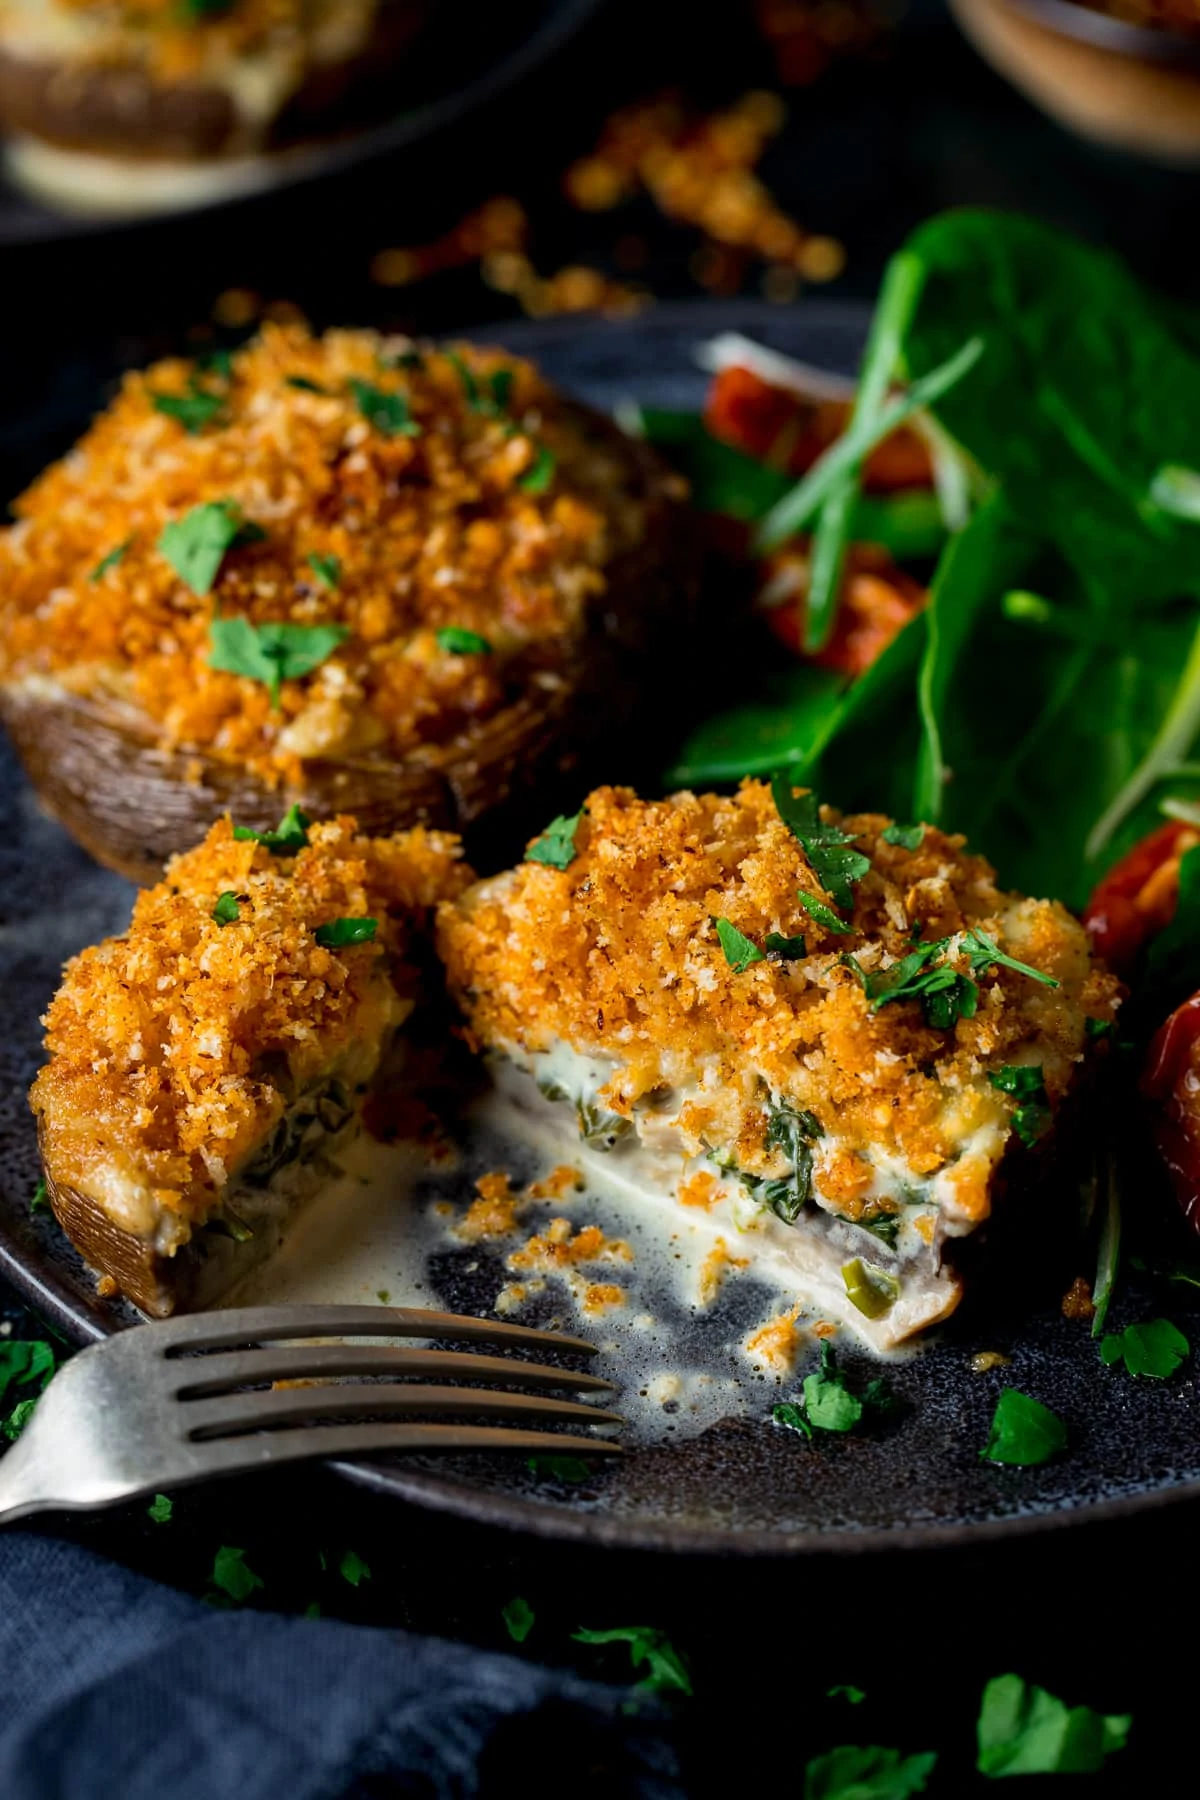 Stuffed mushrooms topped with crispy crumb topping sliced in half